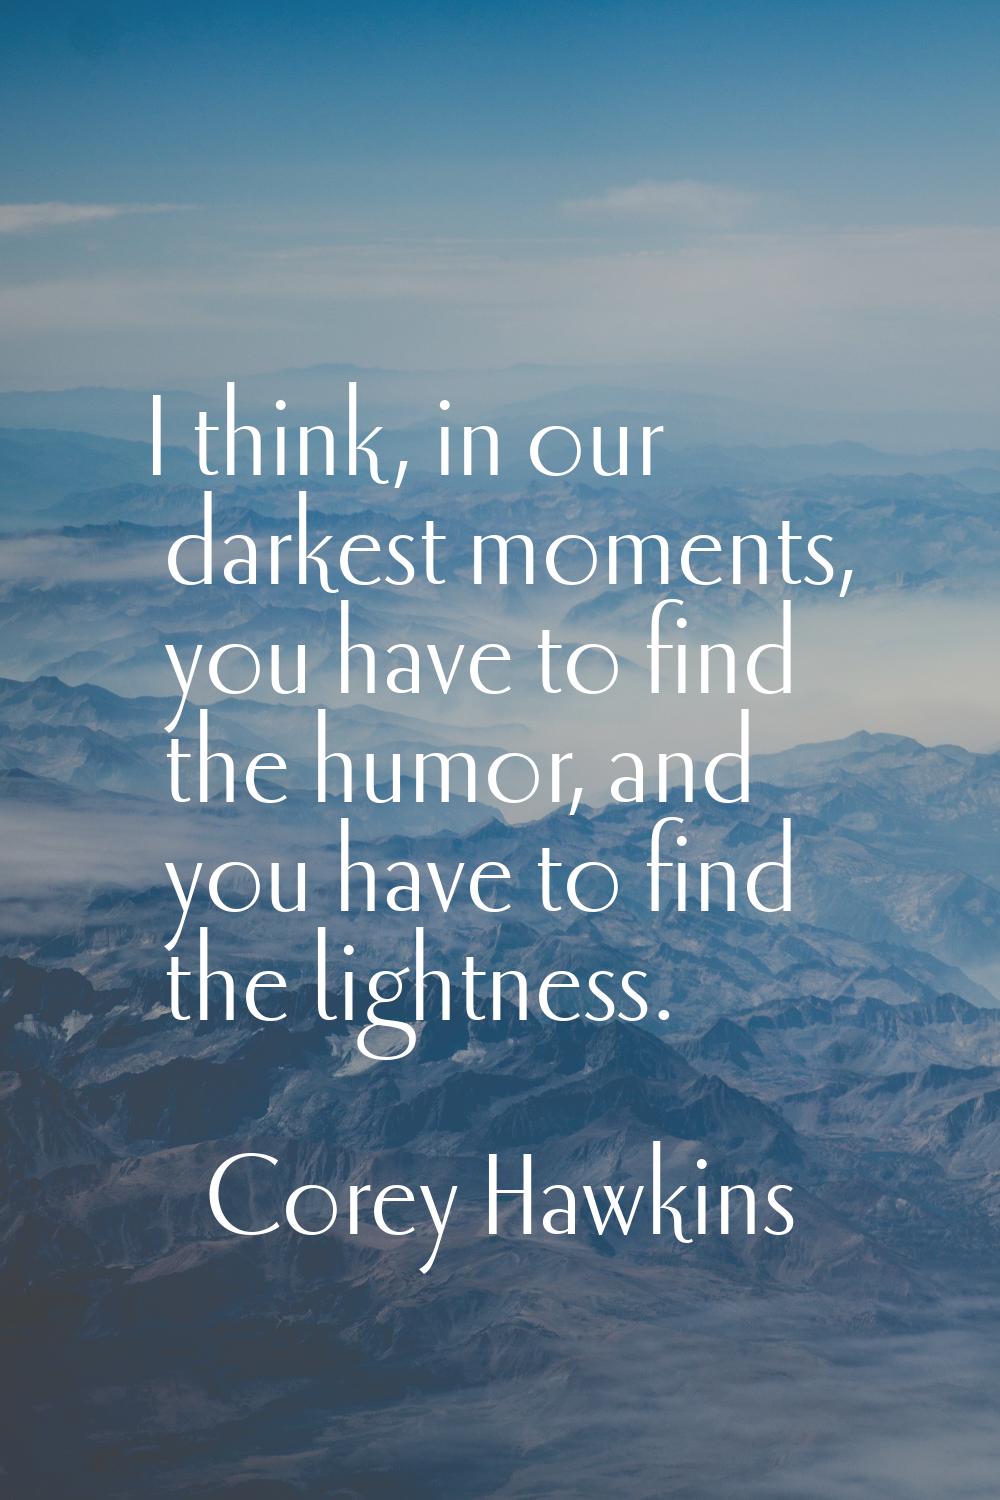 I think, in our darkest moments, you have to find the humor, and you have to find the lightness.